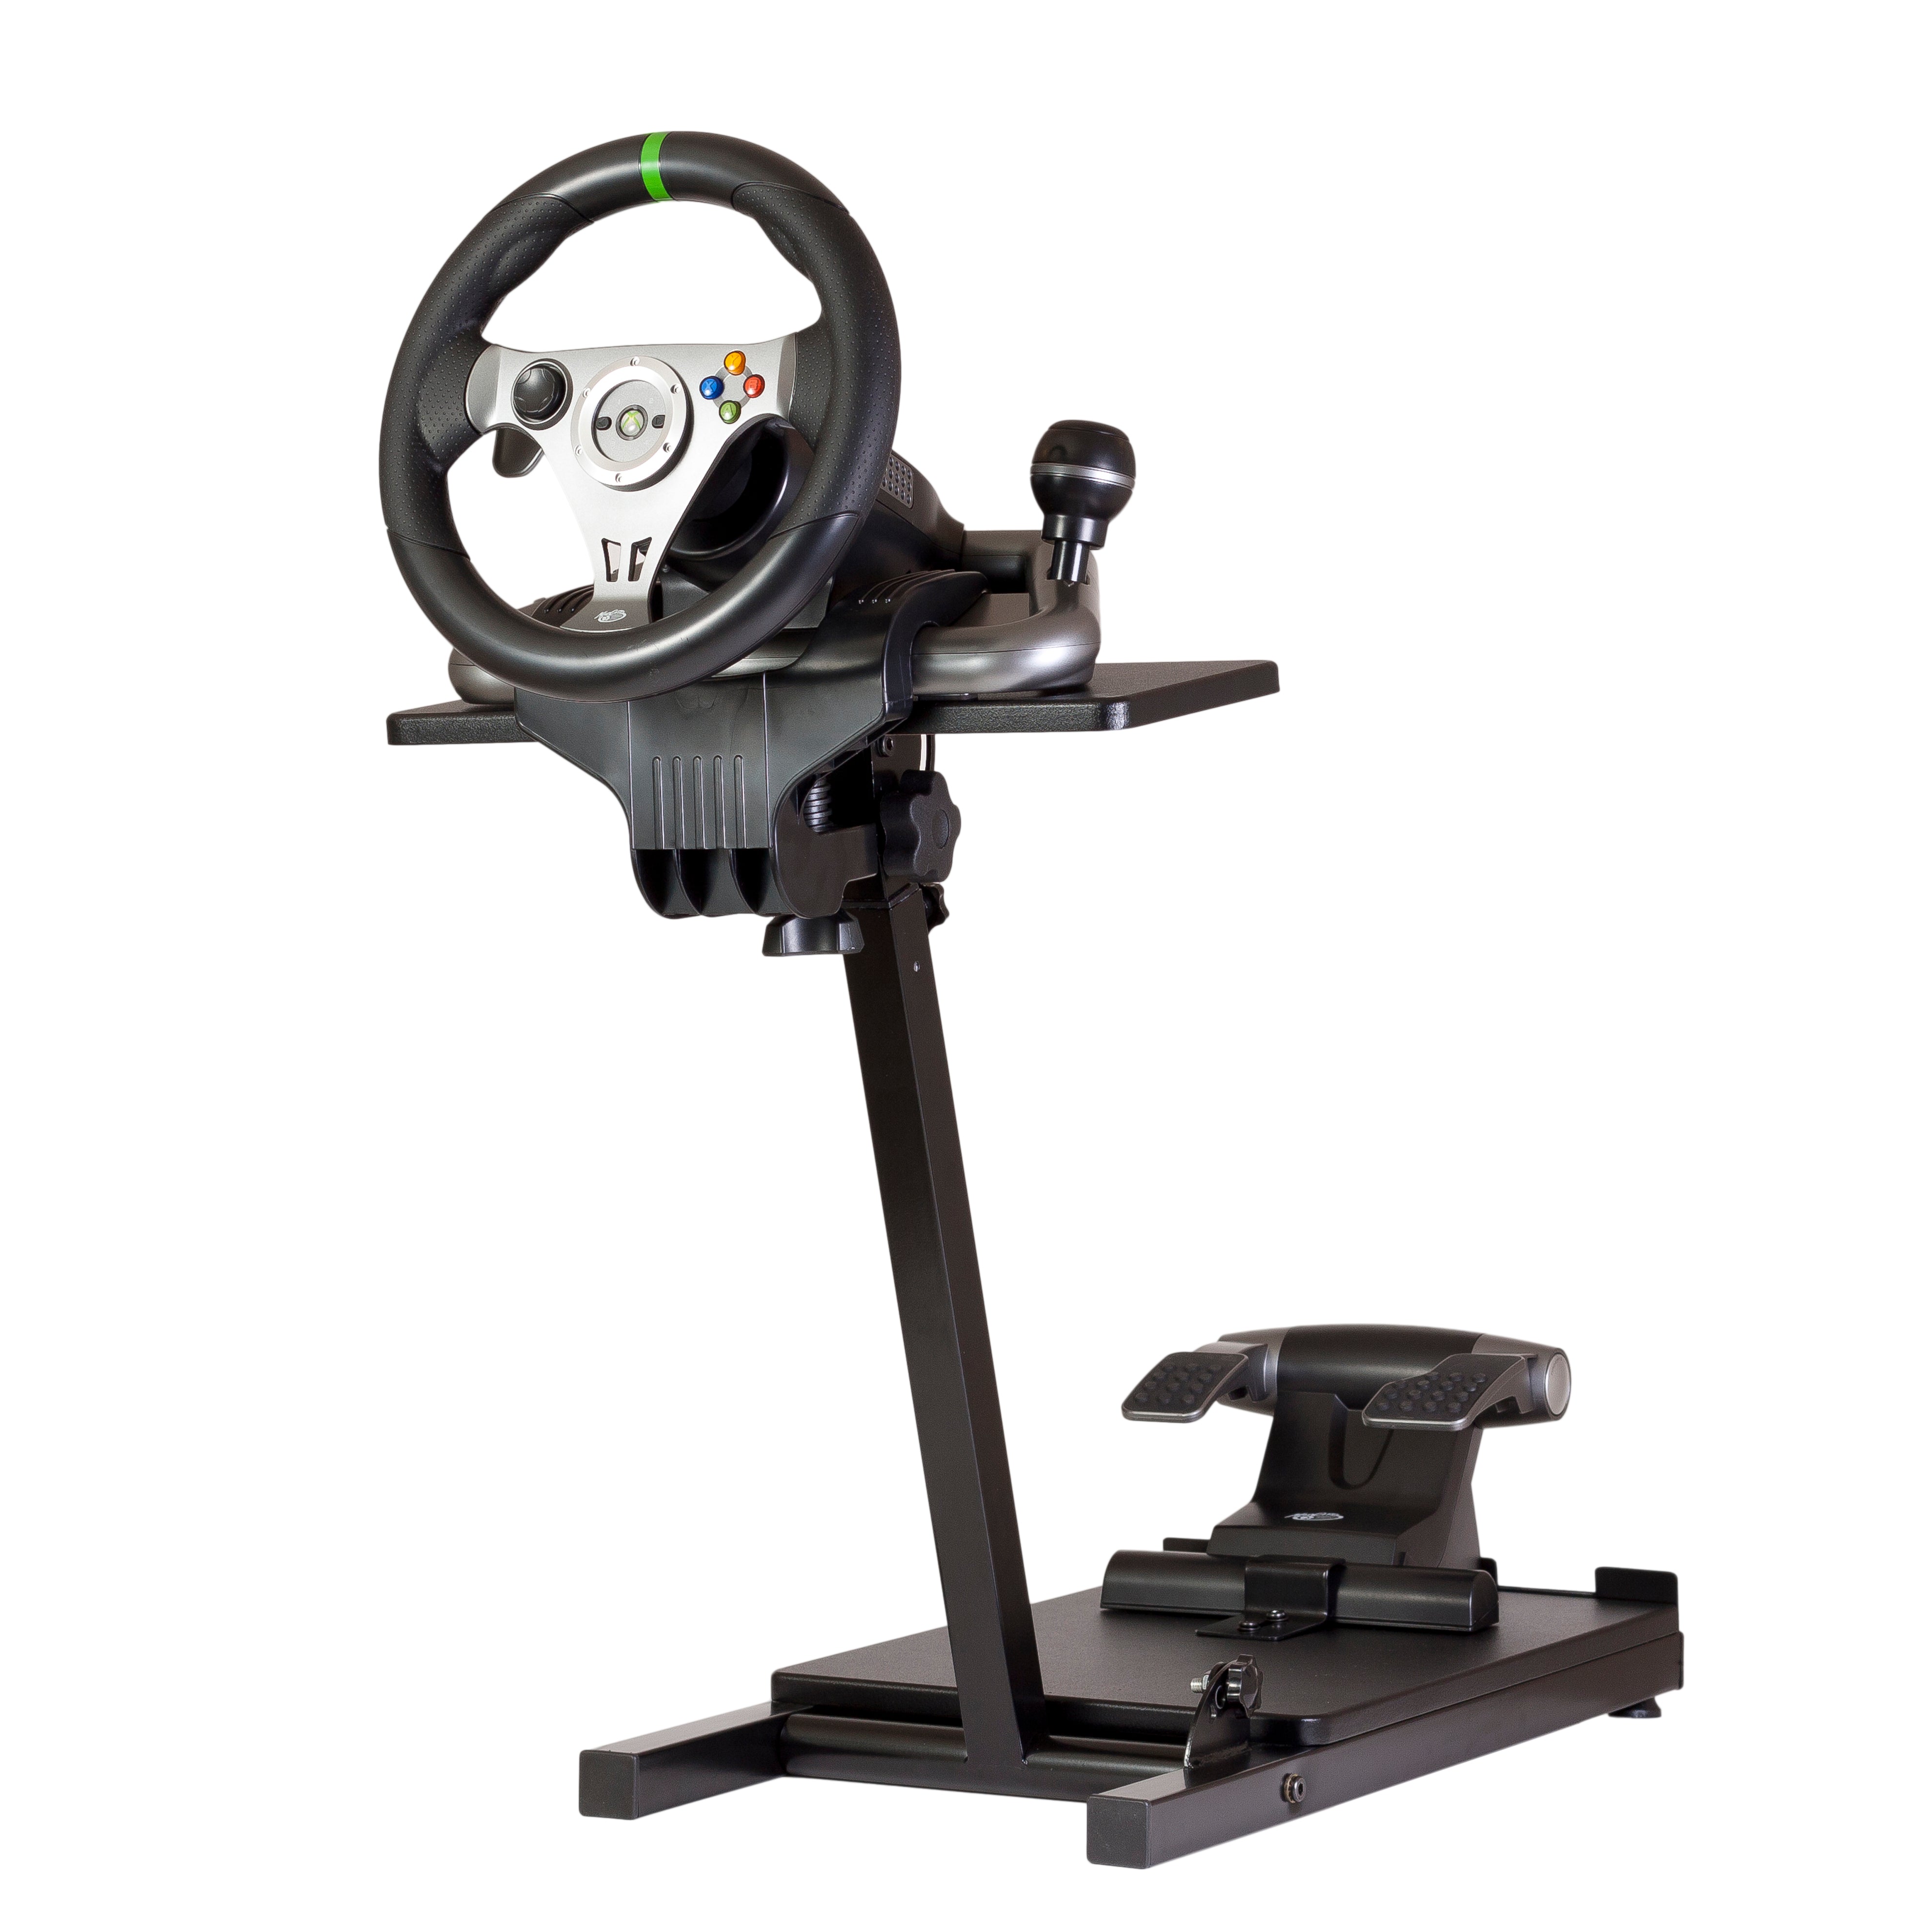 The Ultimate Steering Wheel Stand